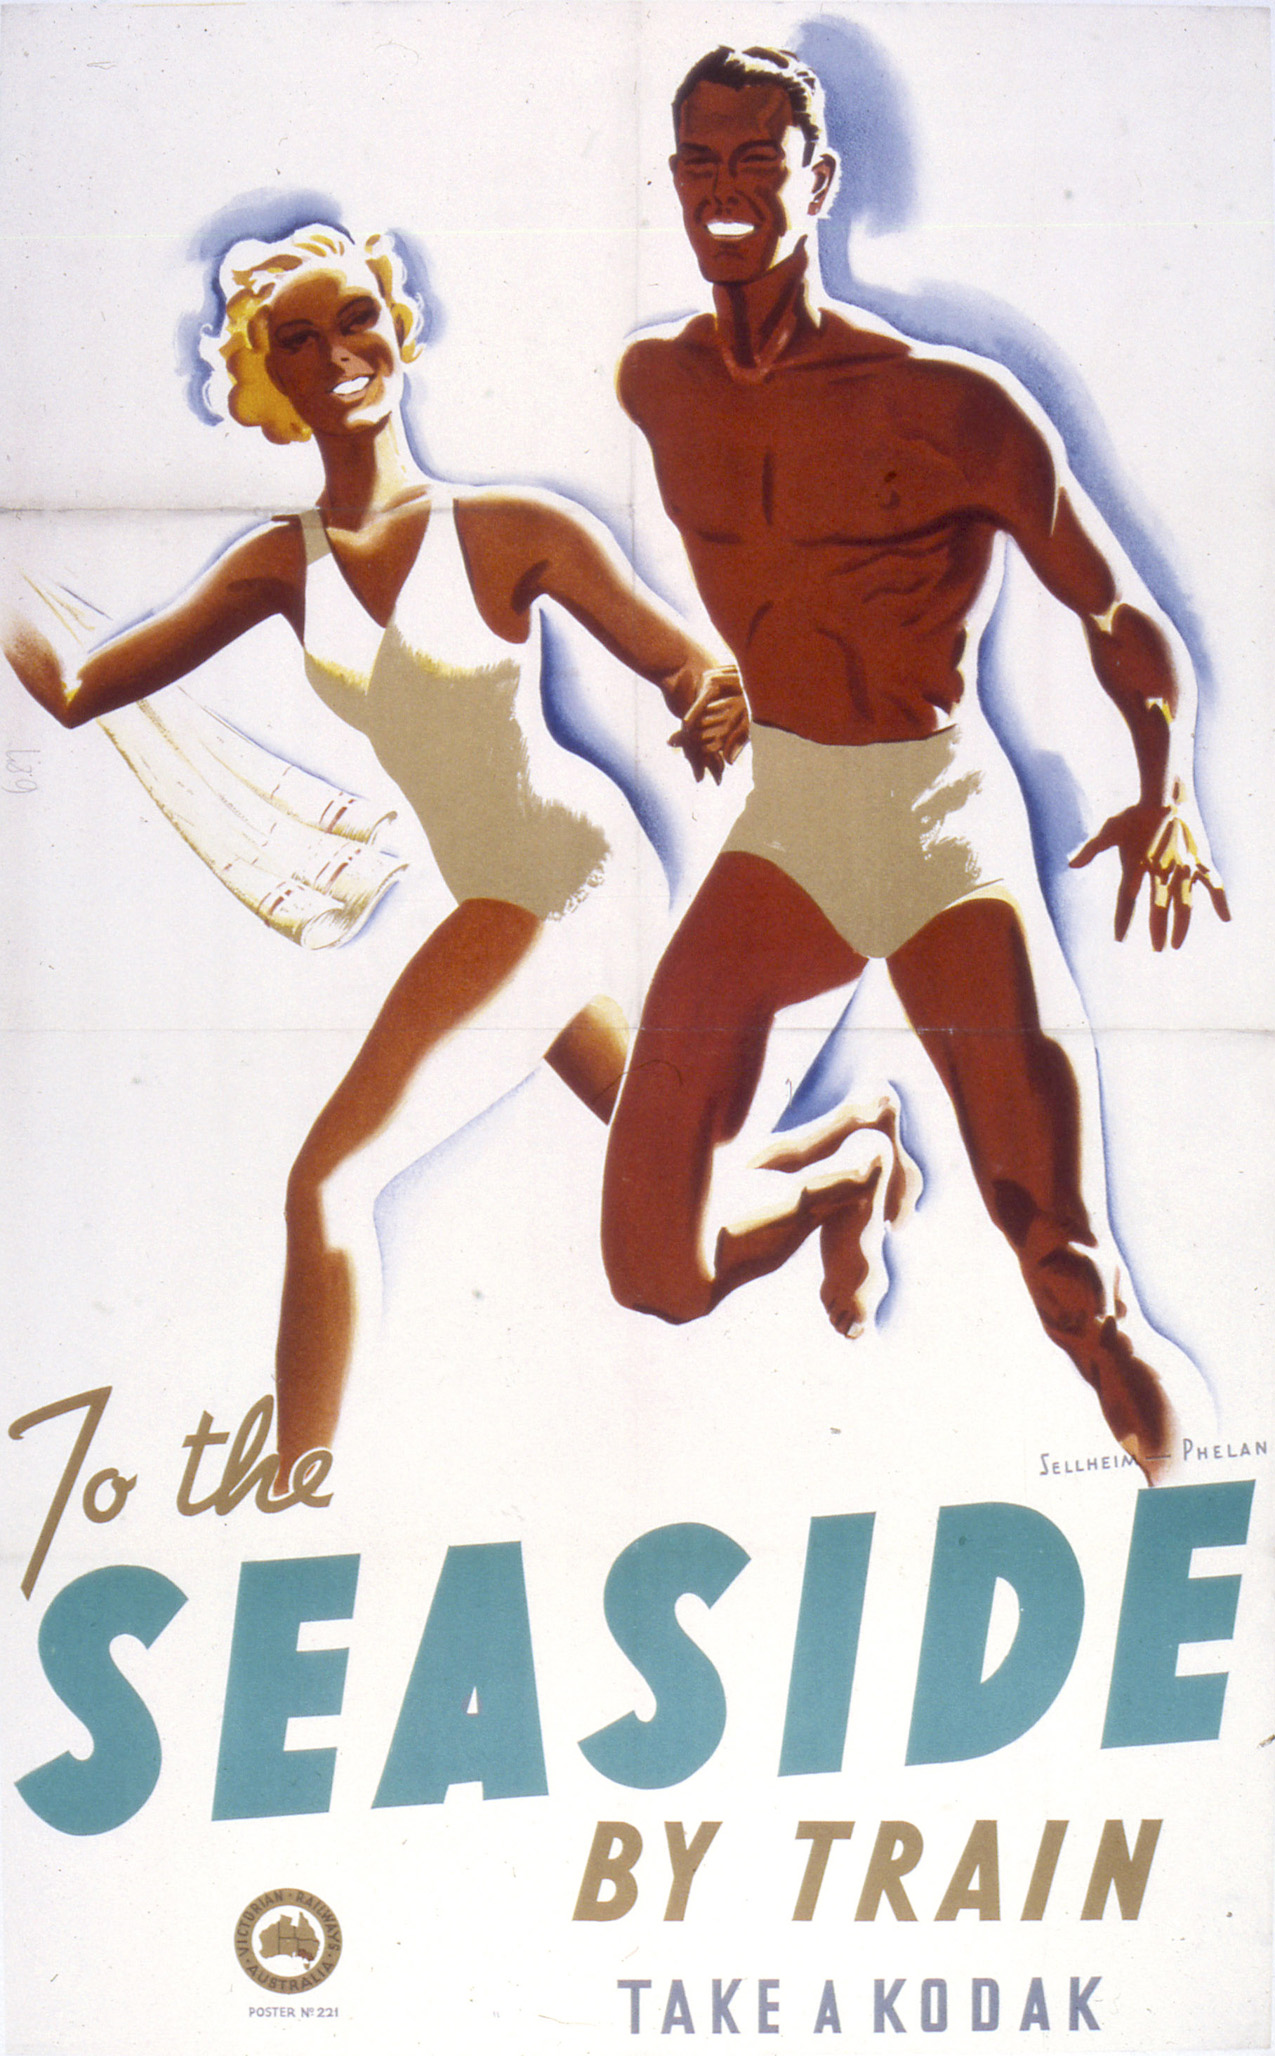 To the seaside by train poster by Gert Sellheim and Phelan